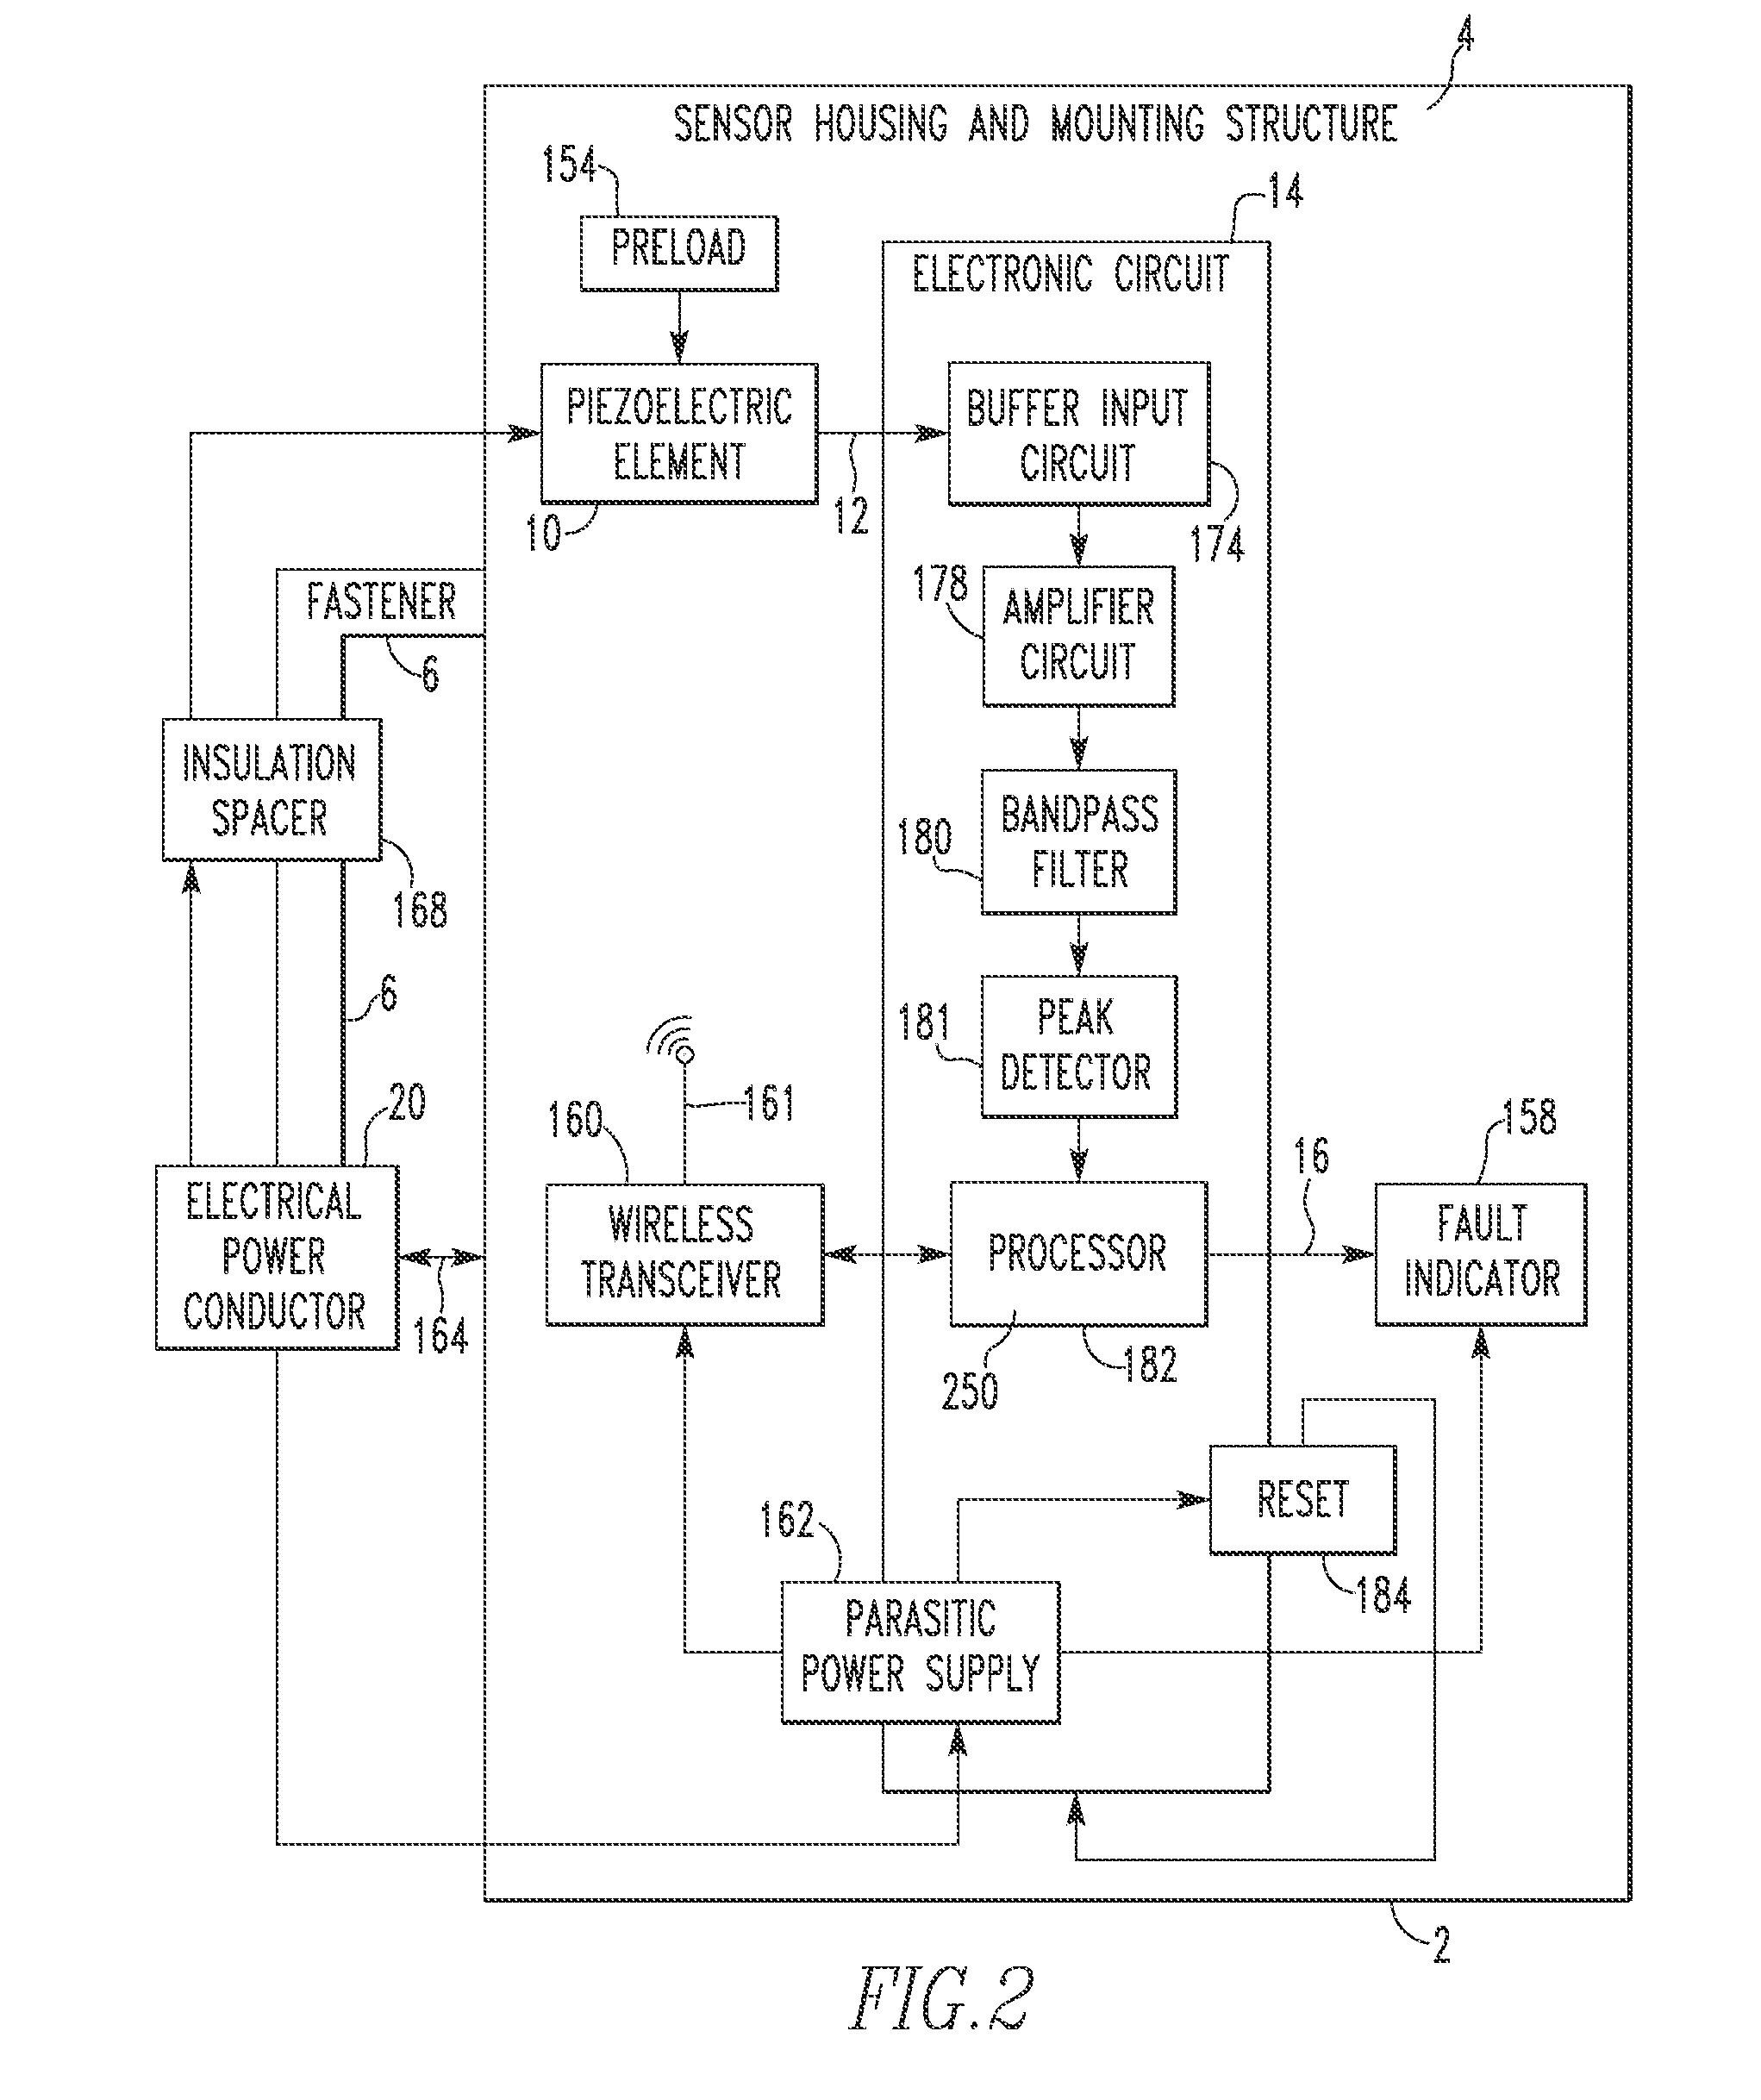 Detection and location of electrical connections having a micro-interface abnormality in an electrical system